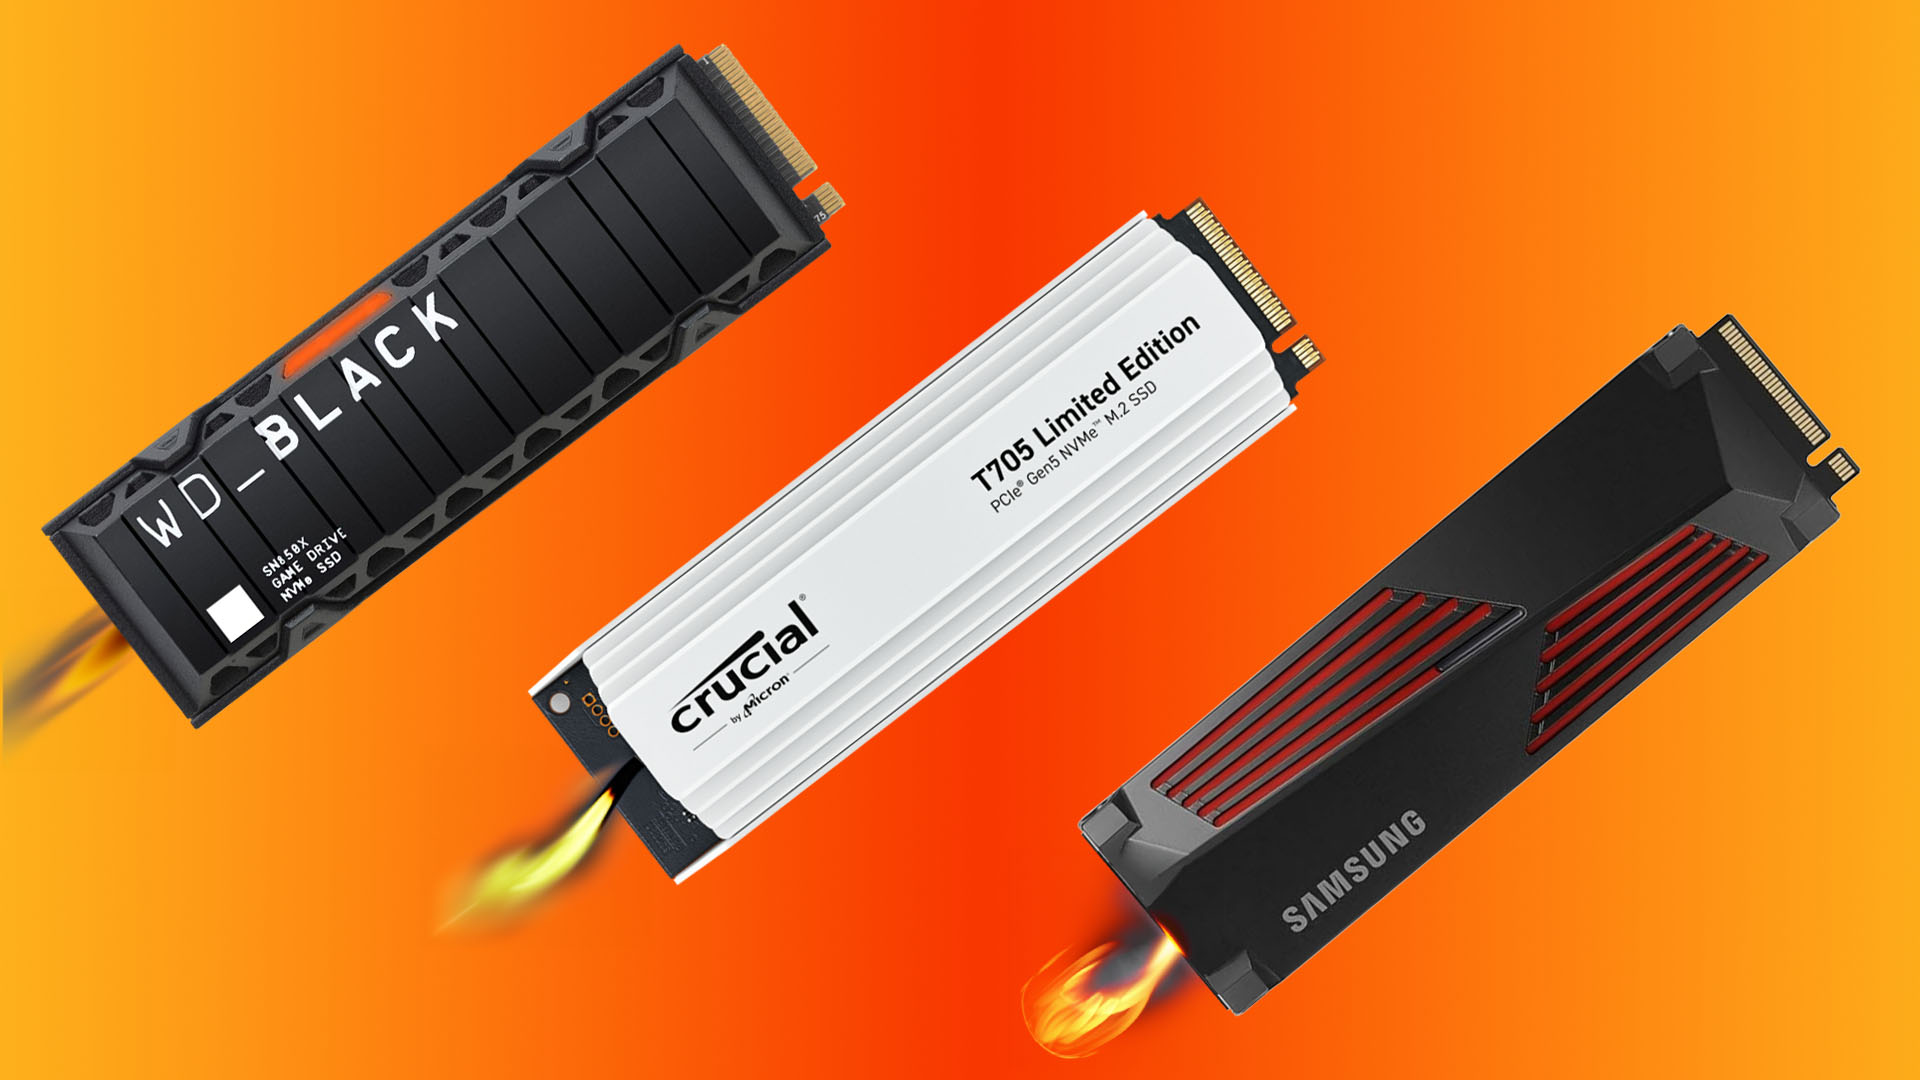 Buy your new SSD now, before prices go up